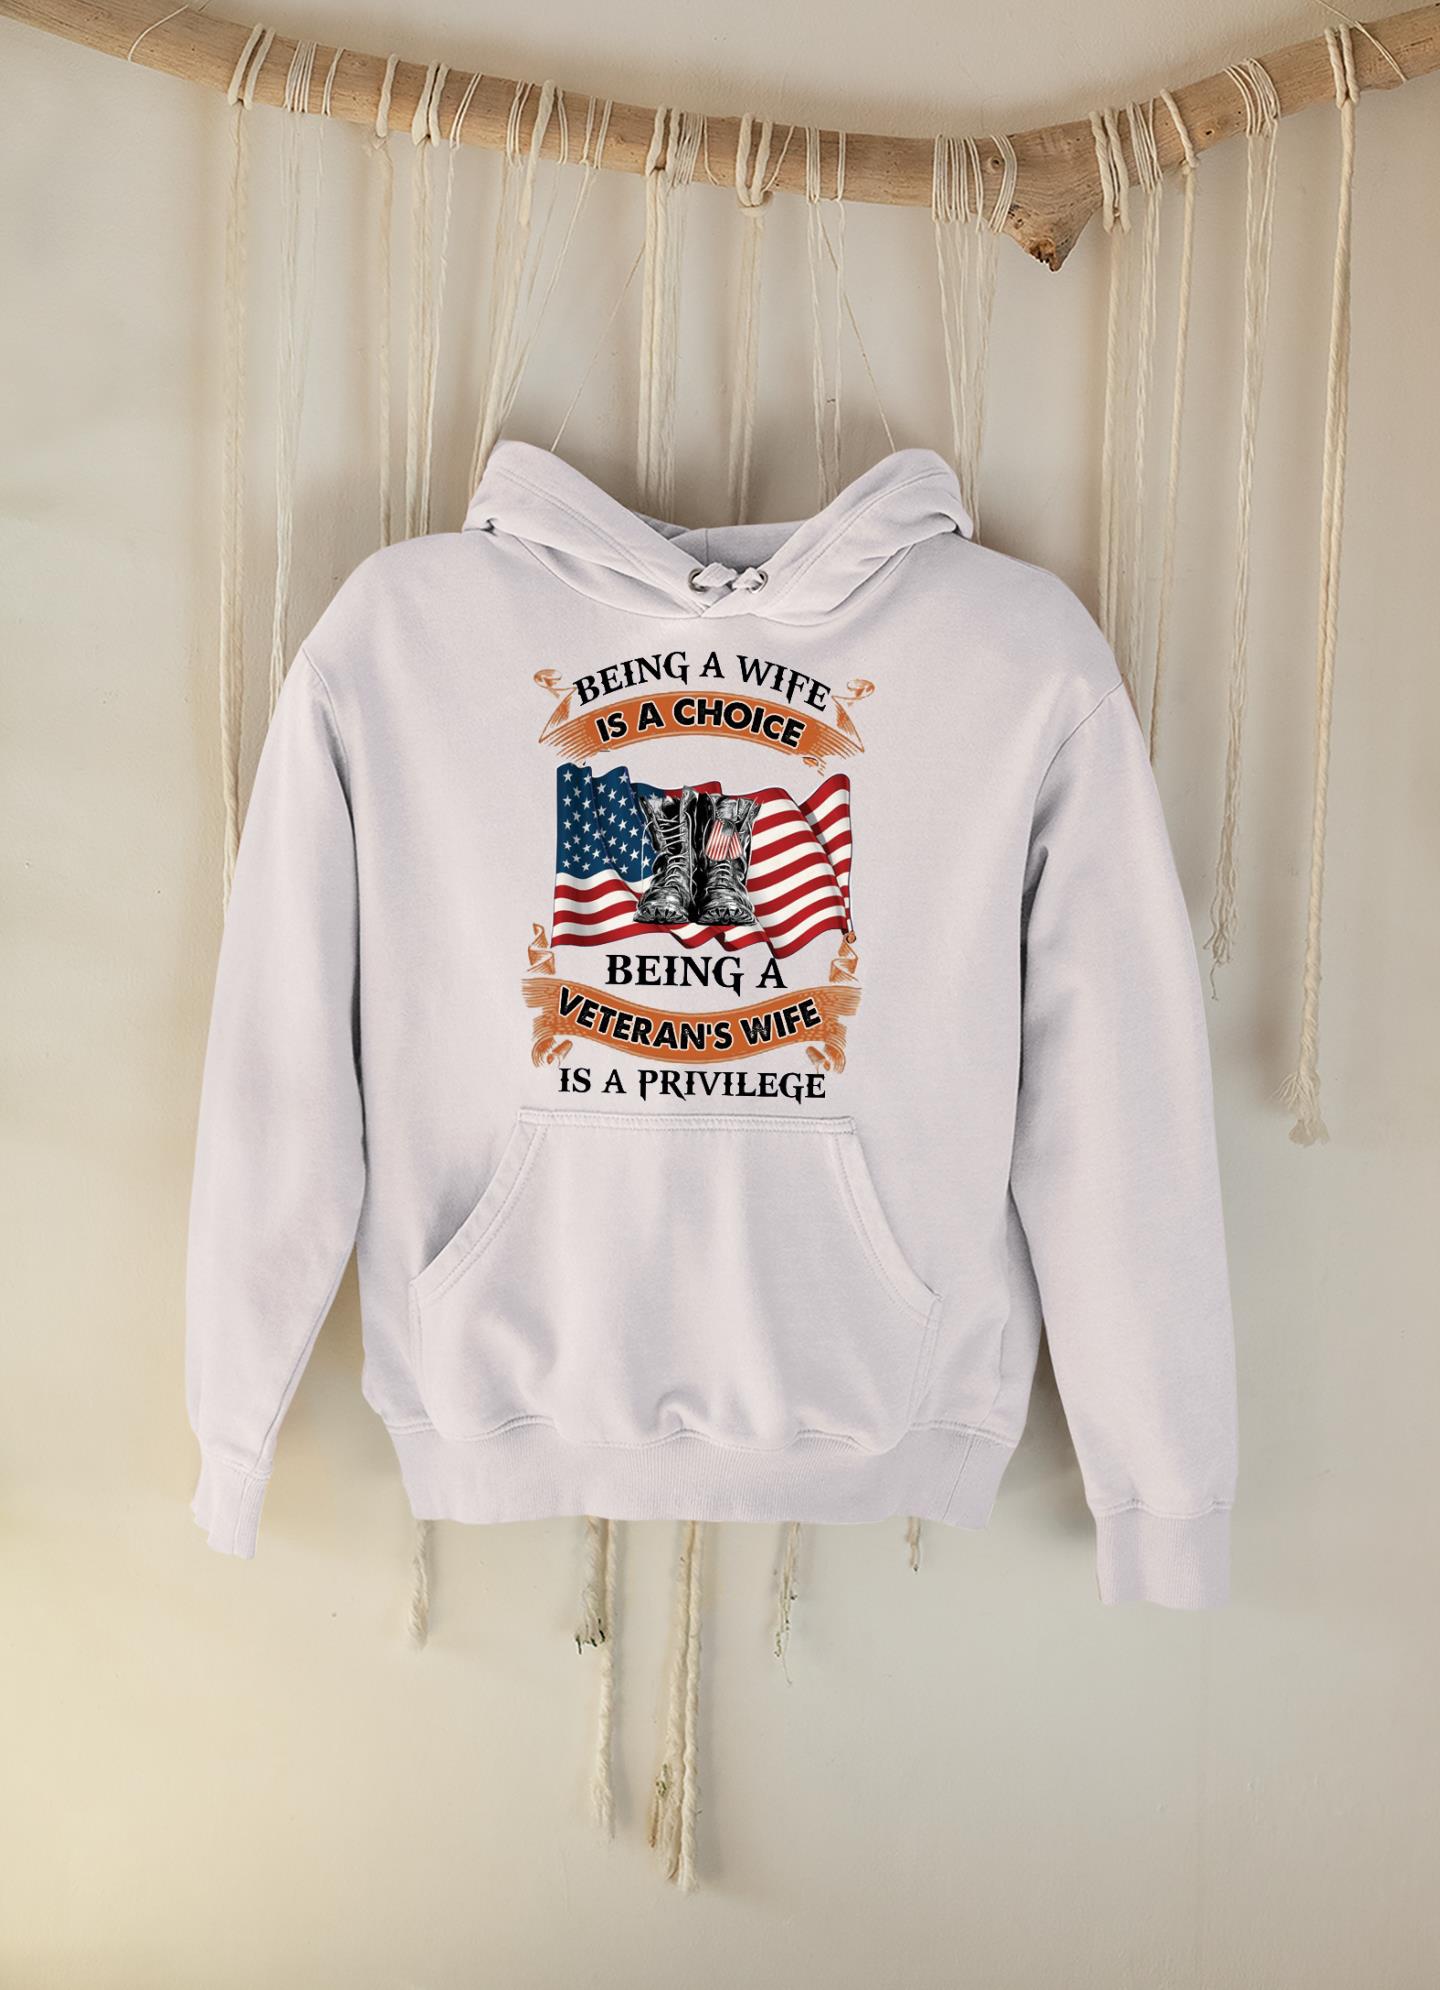 Being a wife is a choice being a veteran is wife is a privilege American flag shirt